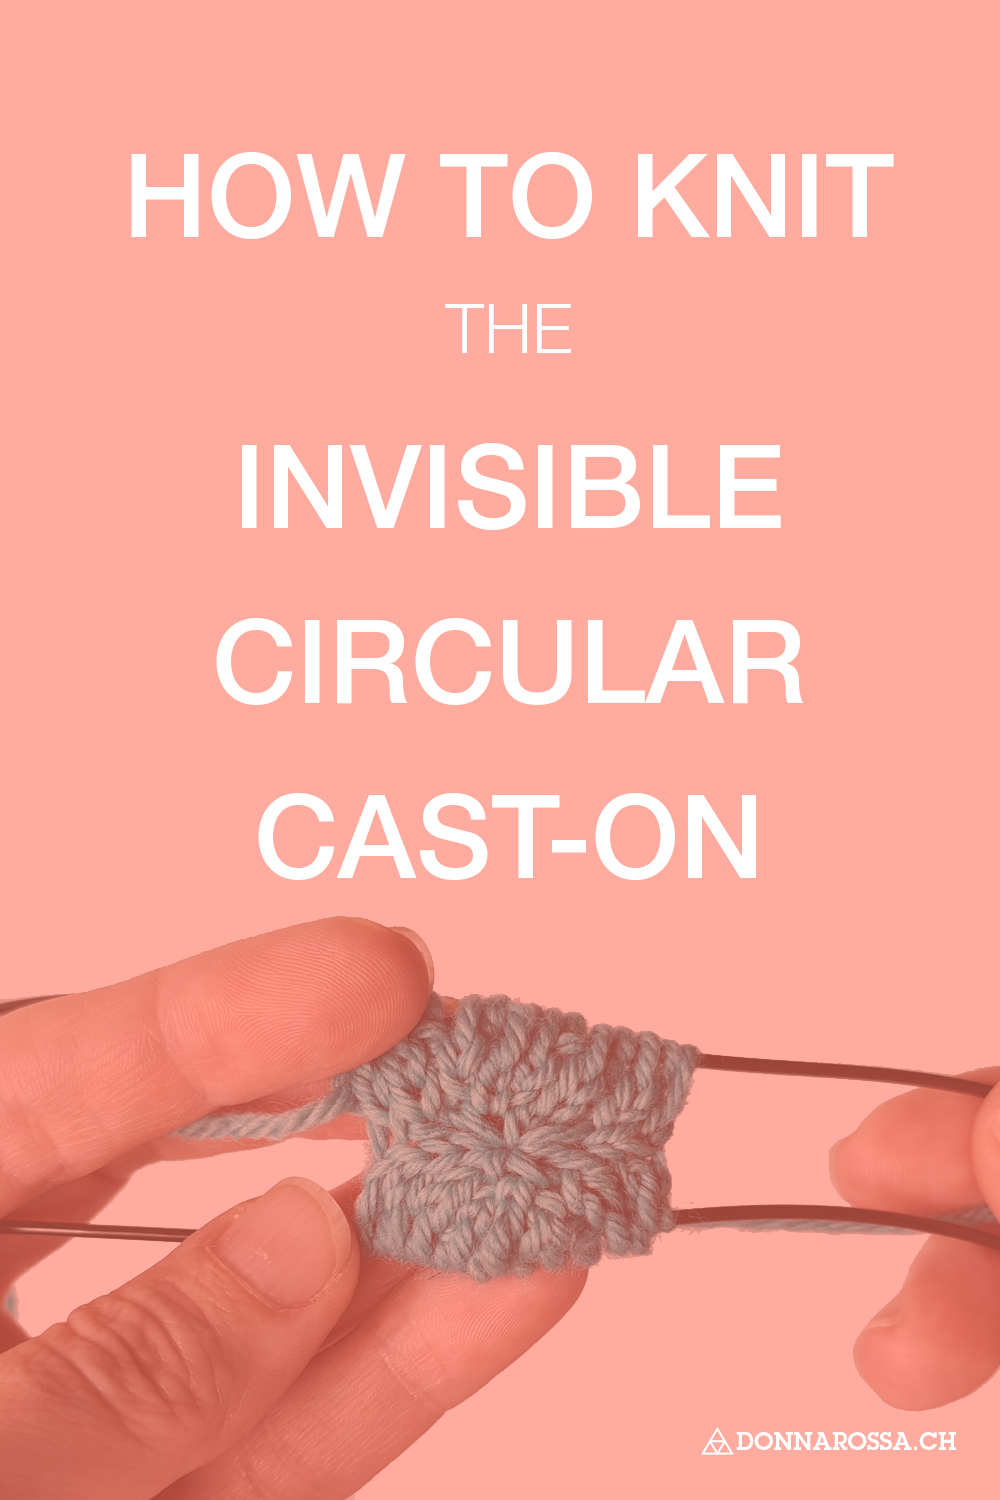 Invisible Circular cast on knit by donnarossa